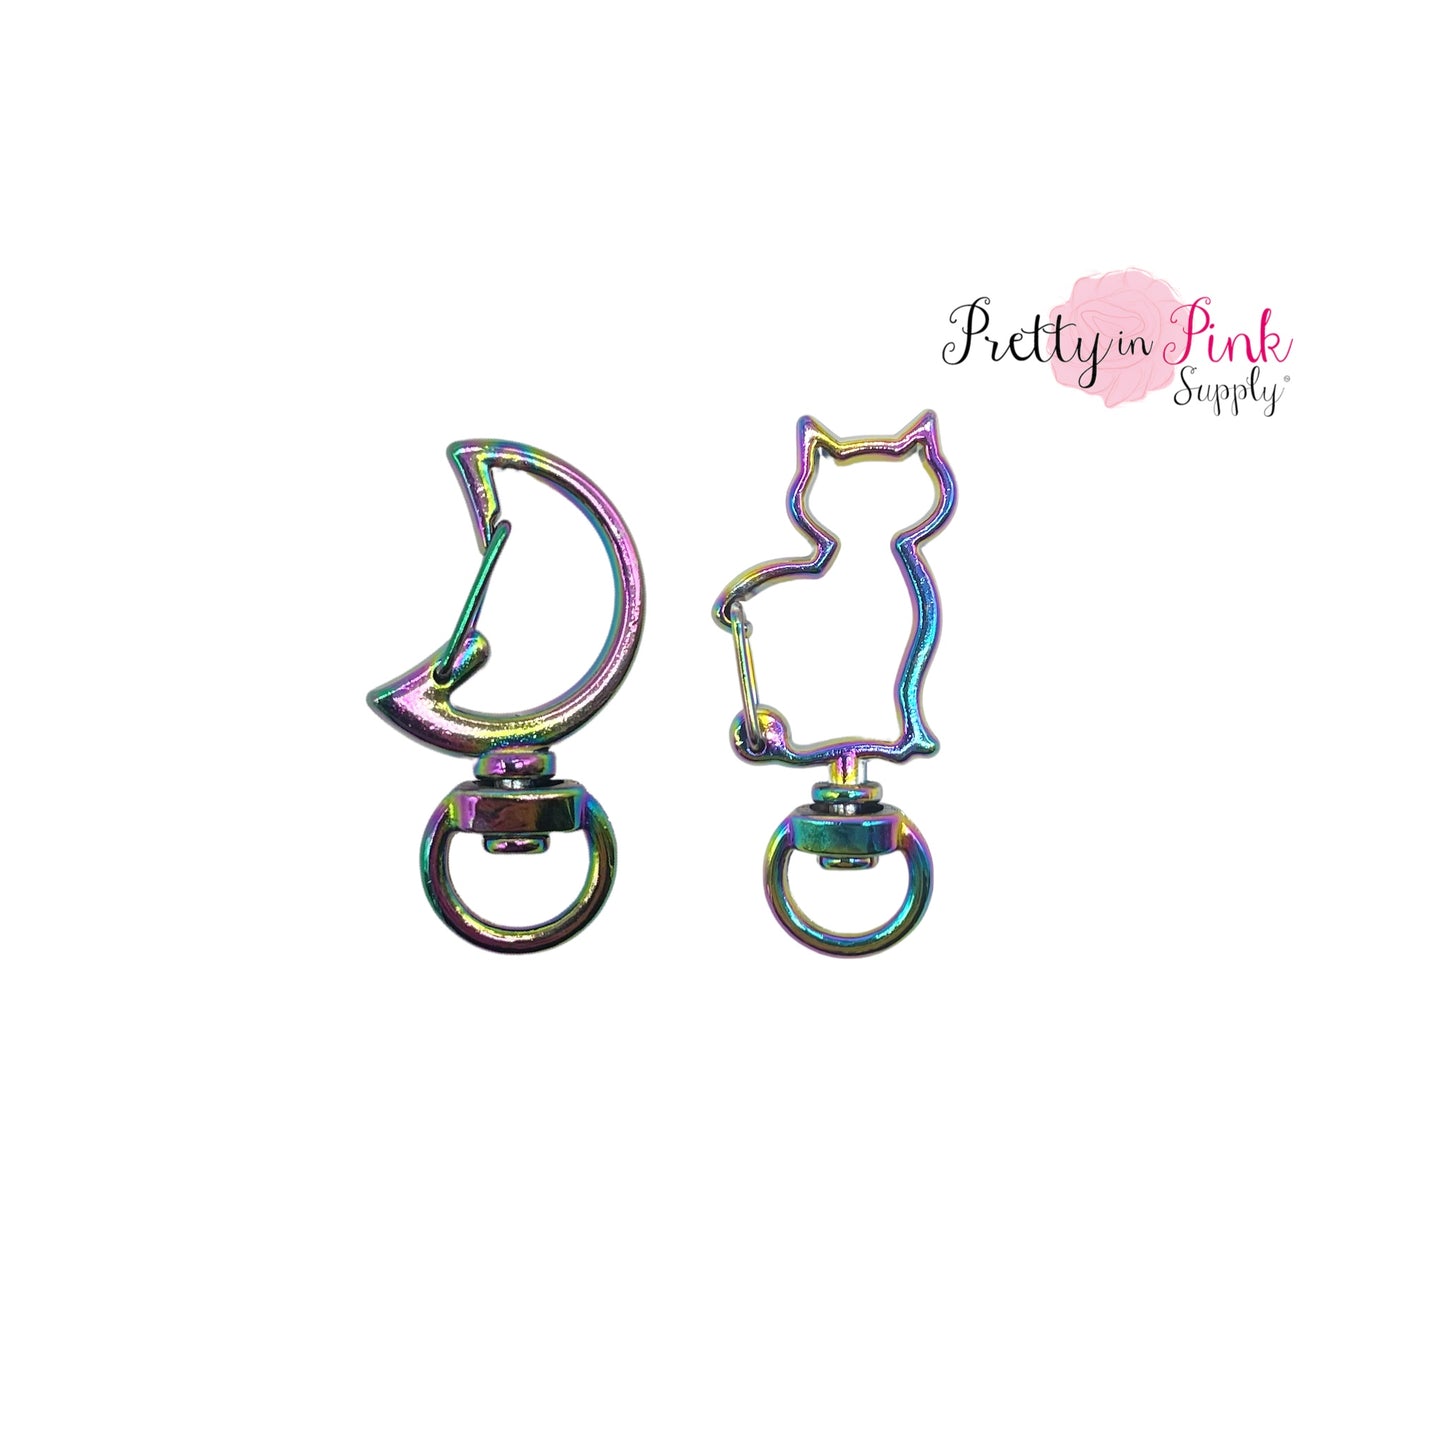 Iridescent metal moon and cat shaped swivel key ring keychain.